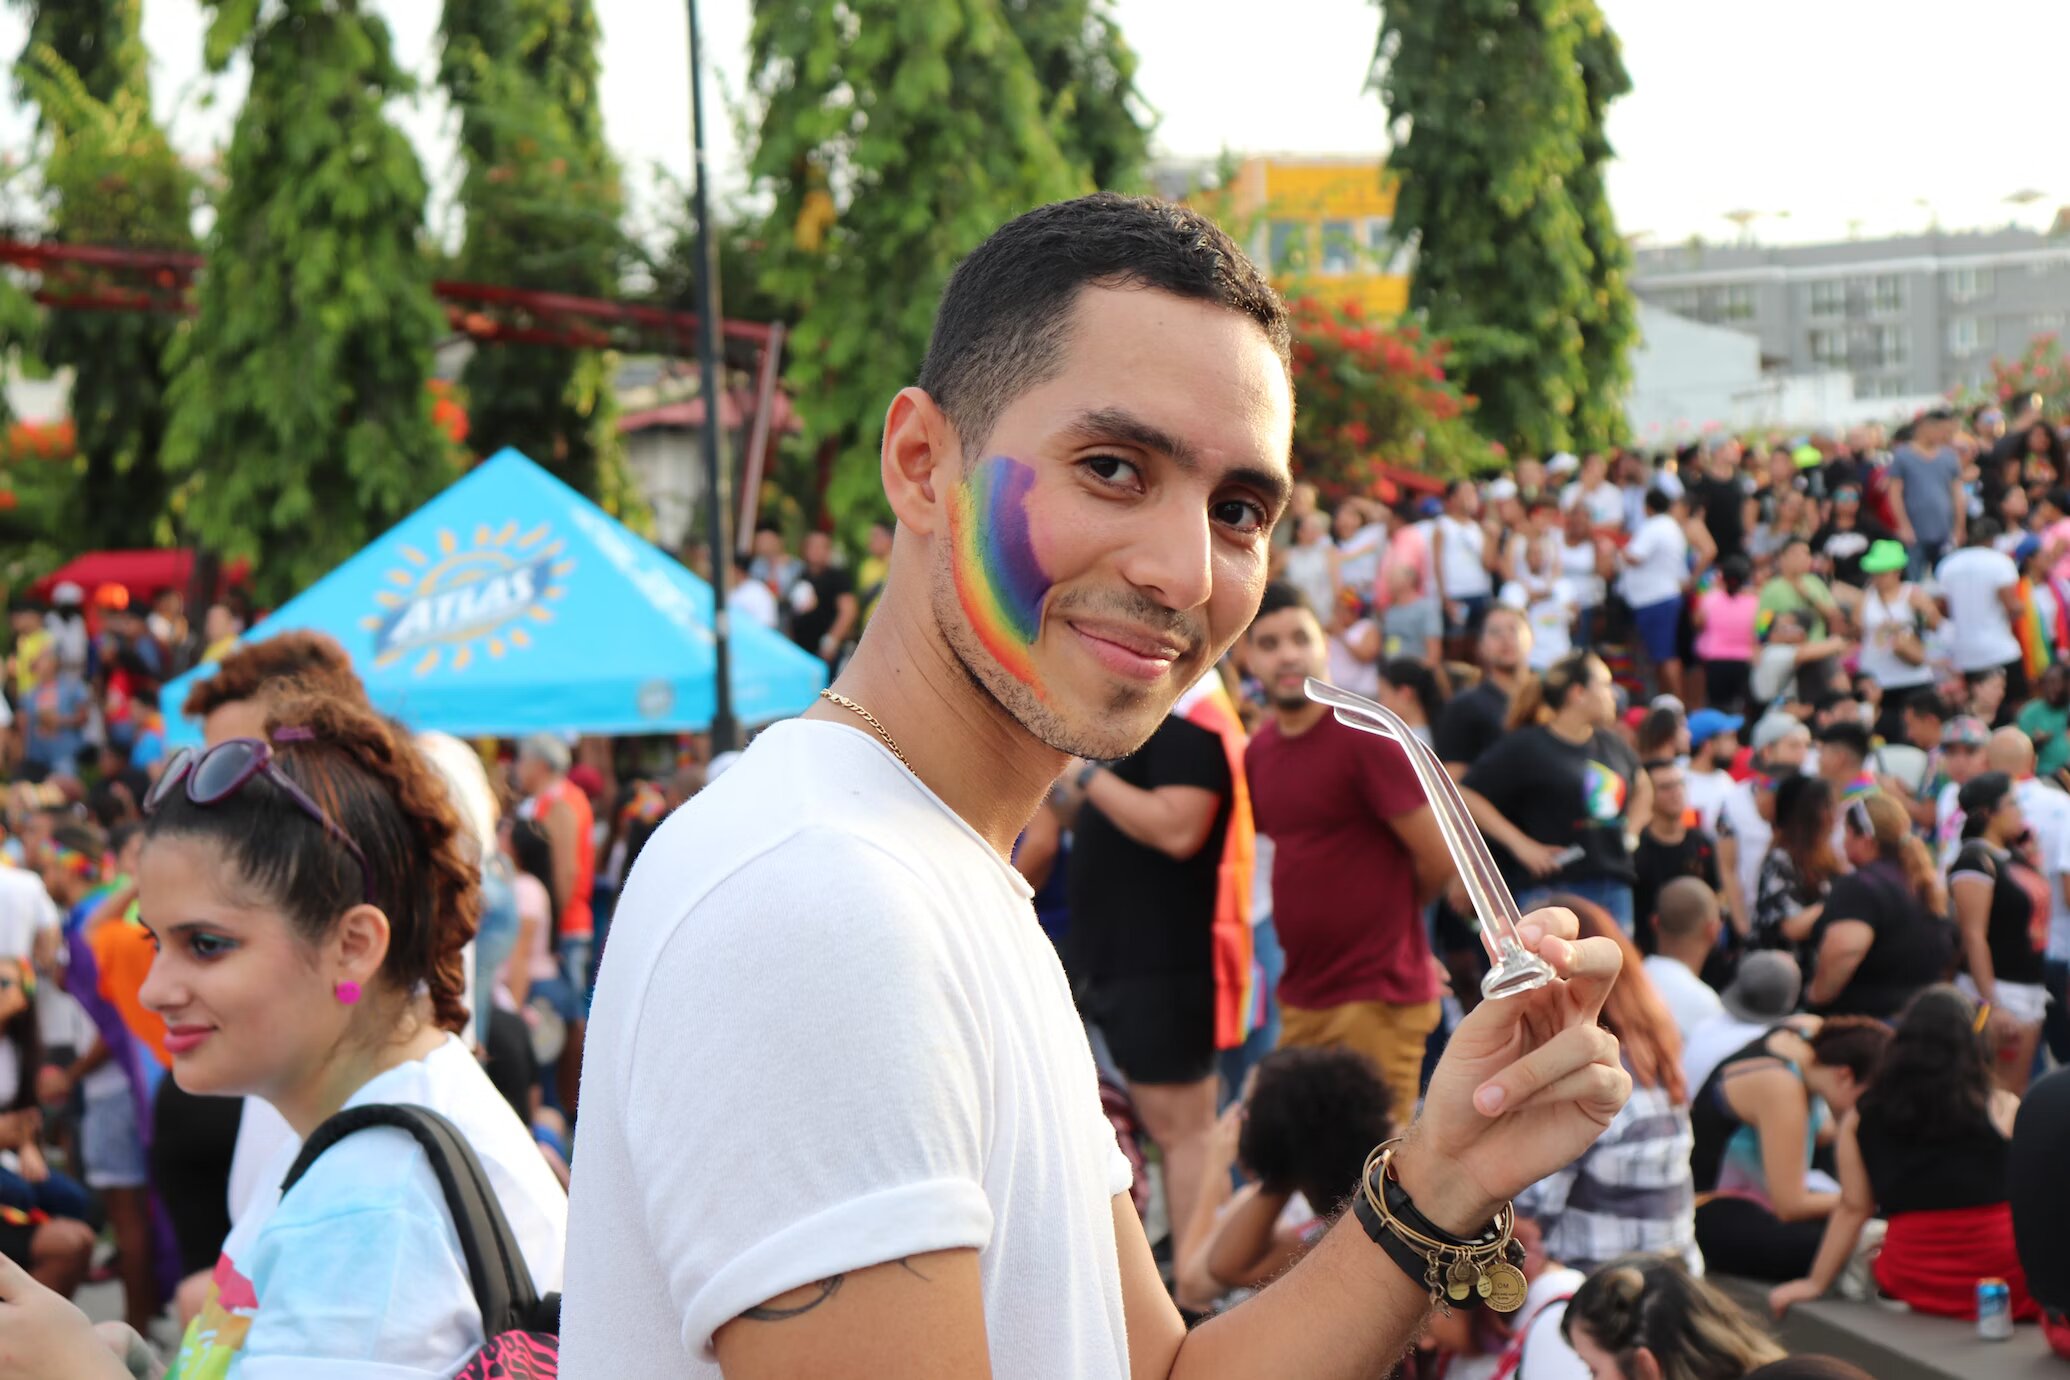 A guy smiling in a Pride parade surrounded by a group of people holding rainbow flags.